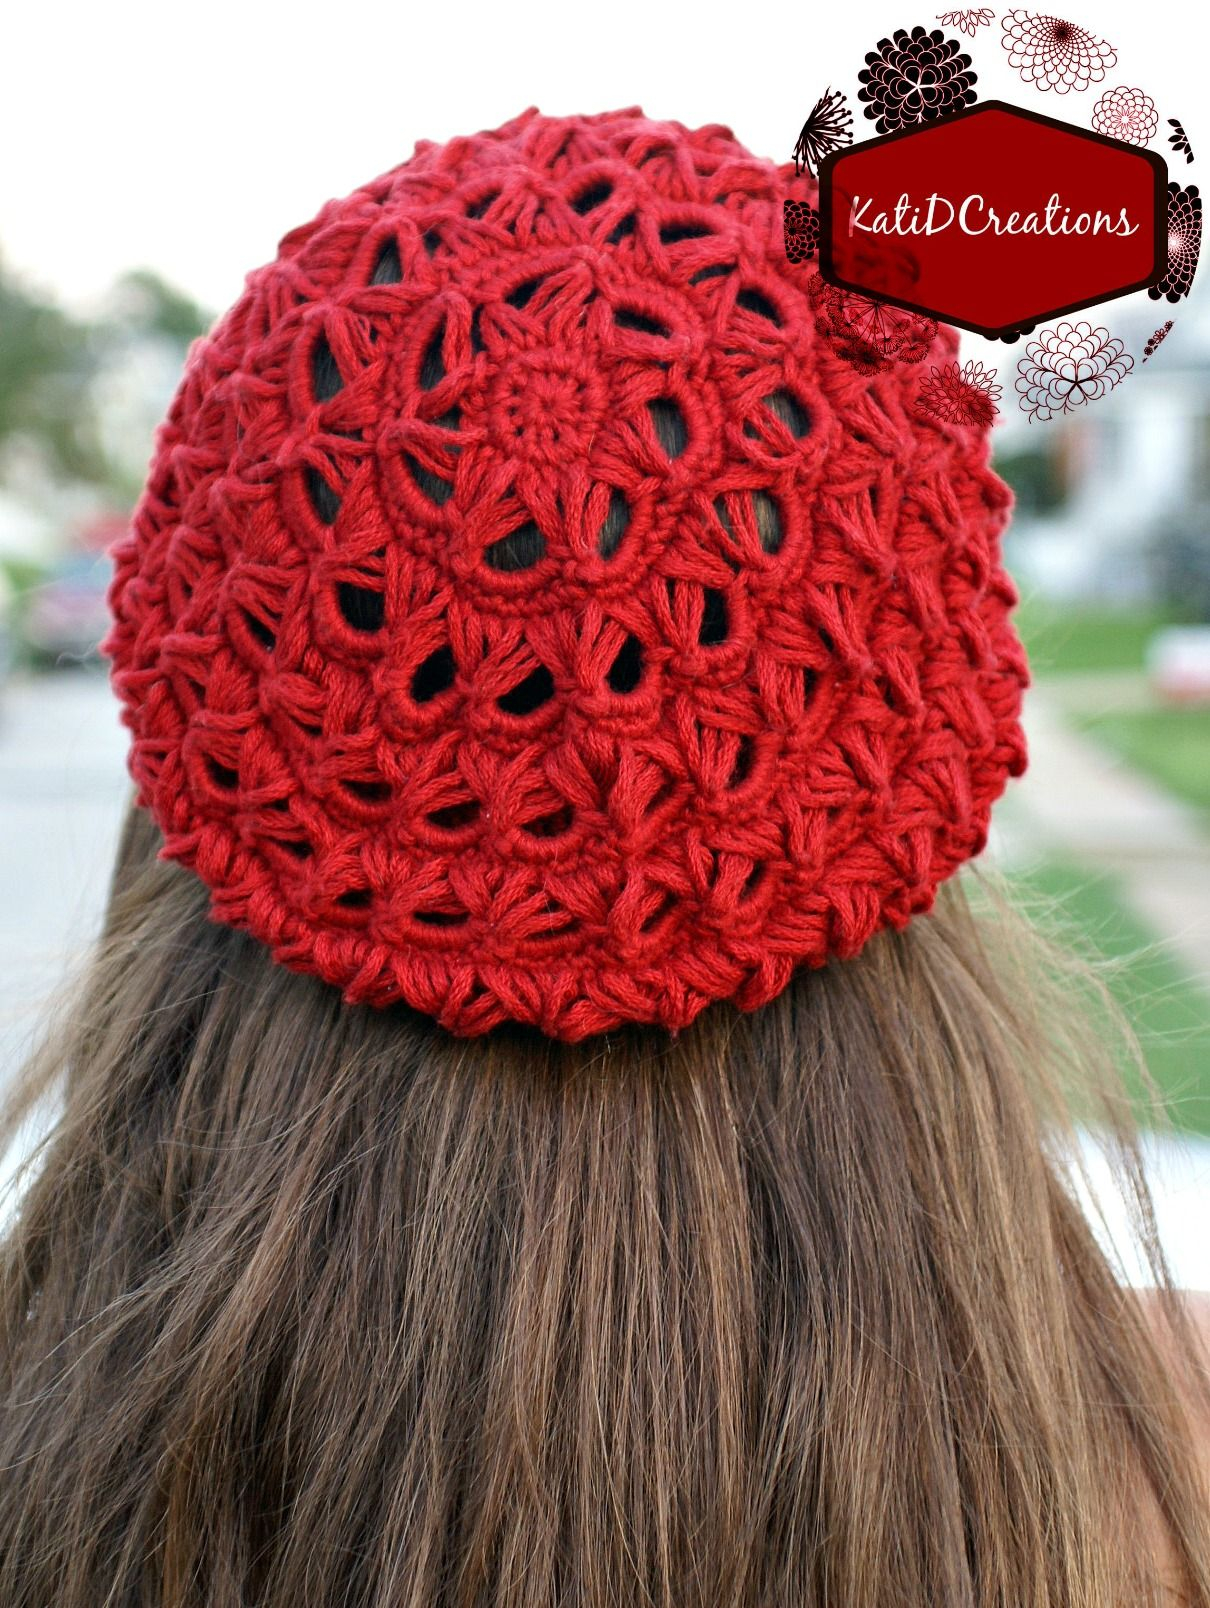 Lace Hat Crochet Pattern Excellent Broomstick Lace Slouchy Hat Free Pattern From